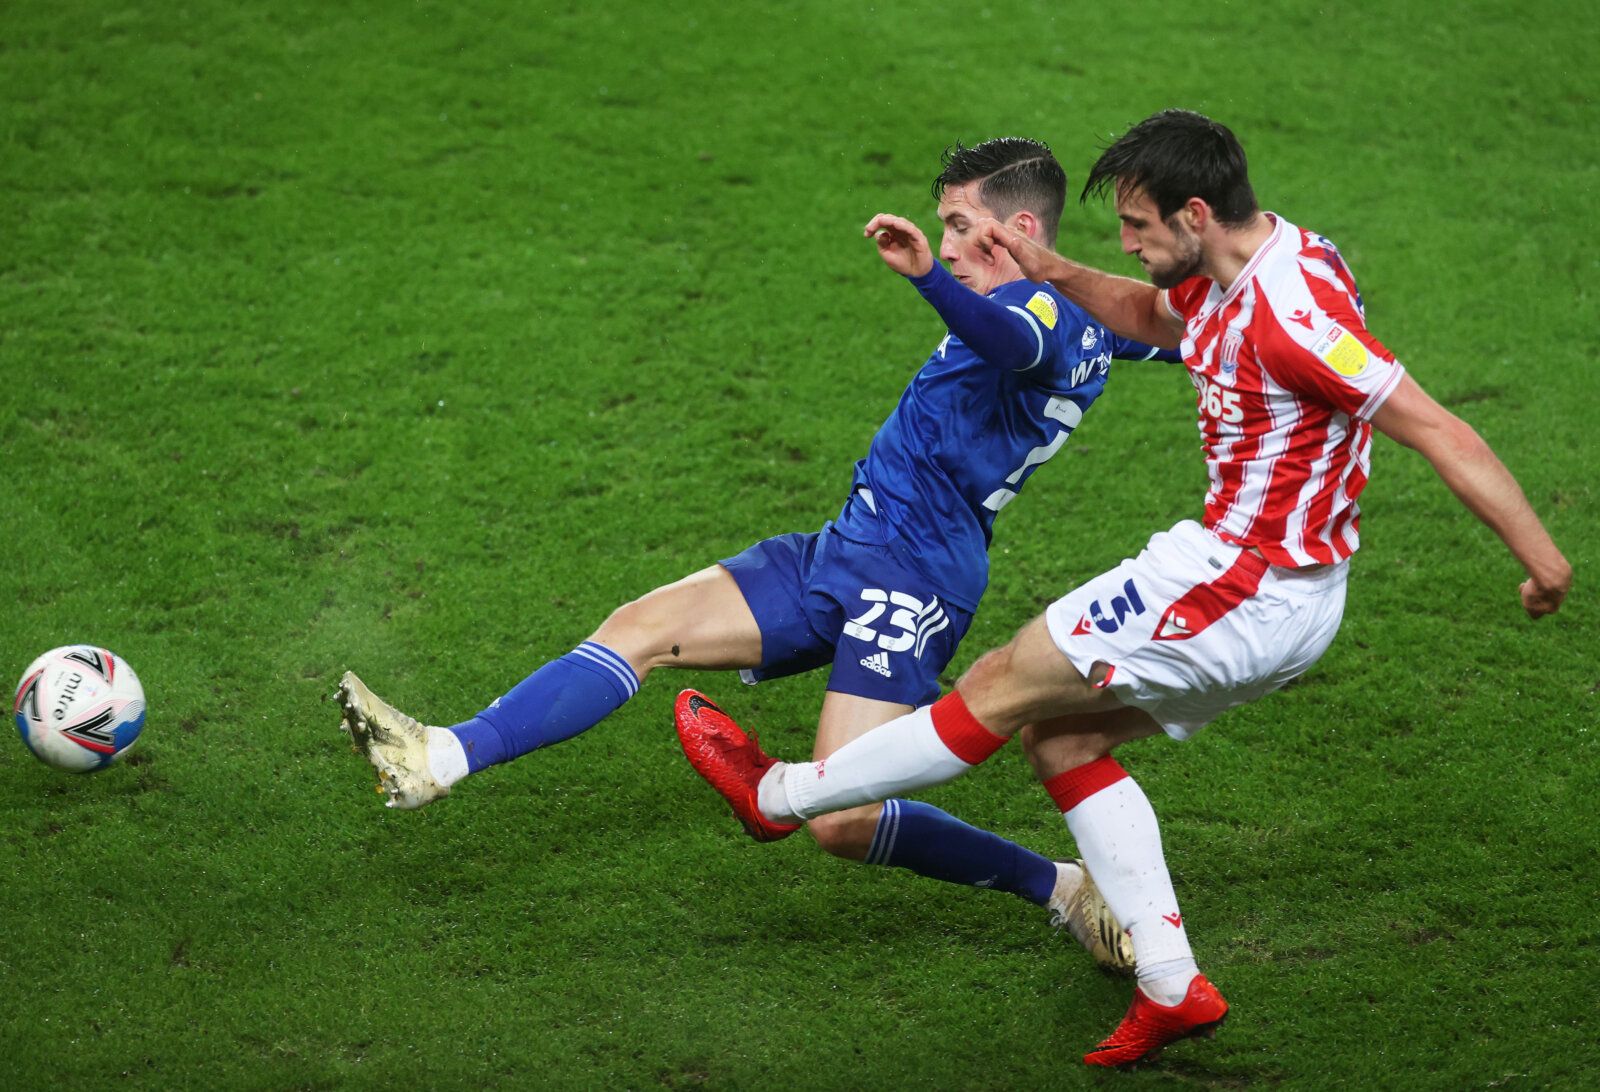 Soccer Football - Championship - Stoke City v Cardiff City - bet365 Stadium, Stoke-on-Trent, Britain - December 8, 2020 Stoke City's Morgan Fox in action with Cardiff City's Harry Wilson Action Images/Carl Recine EDITORIAL USE ONLY. No use with unauthorized audio, video, data, fixture lists, club/league logos or 'live' services. Online in-match use limited to 75 images, no video emulation. No use in betting, games or single club /league/player publications.  Please contact your account represent